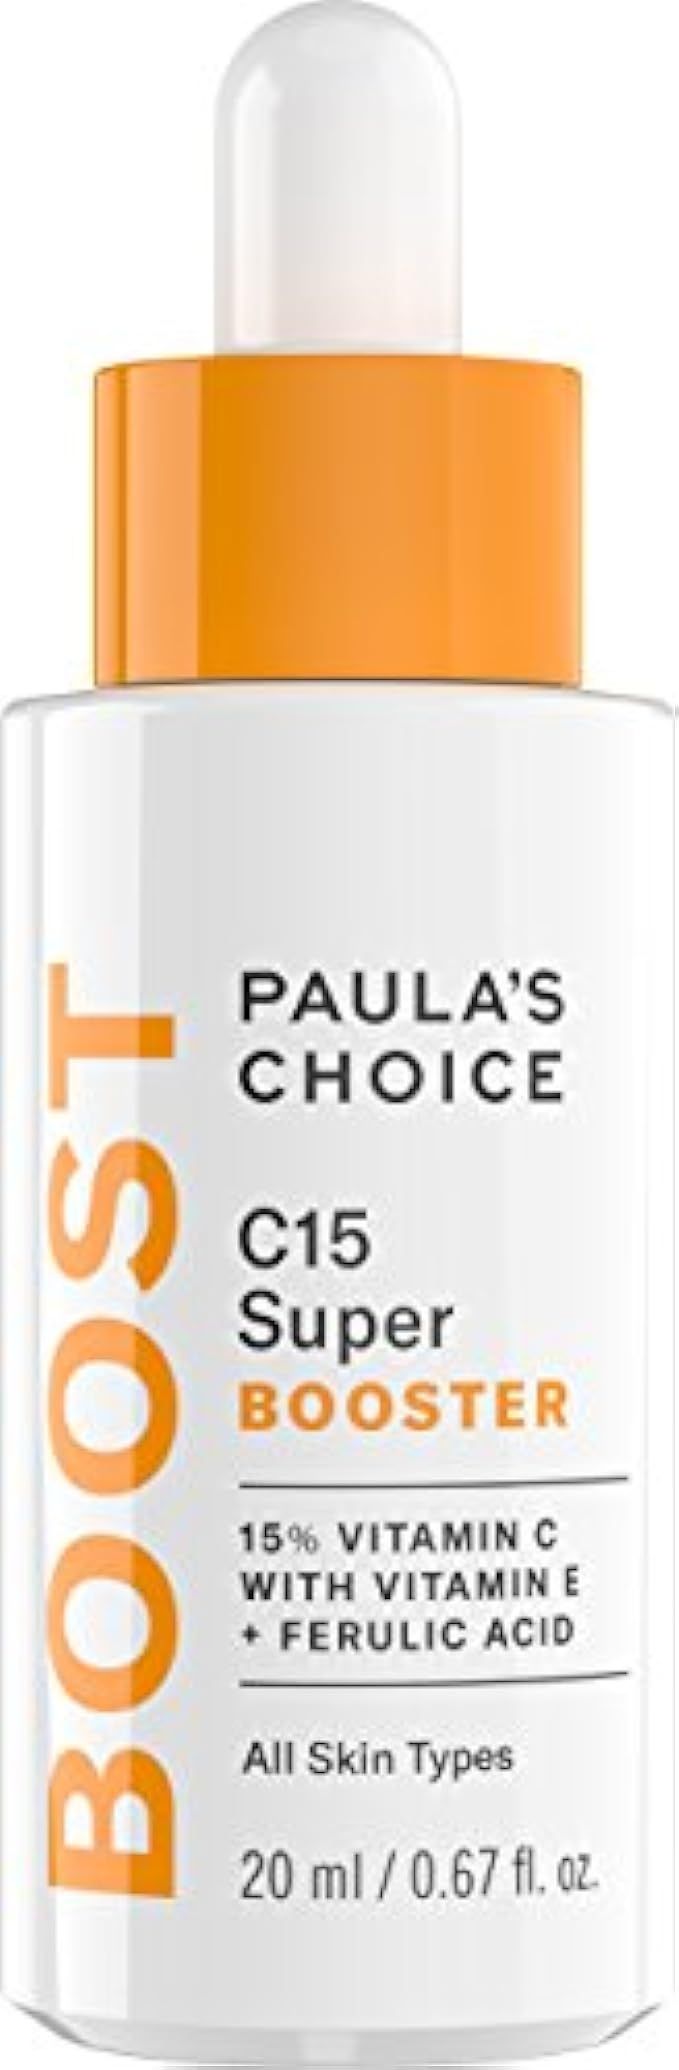 Paula's Choice BOOST C15 Super Booster 15% Vitamin C with Vitamin E and Ferulic Acid for All Skin Ty | Amazon (US)